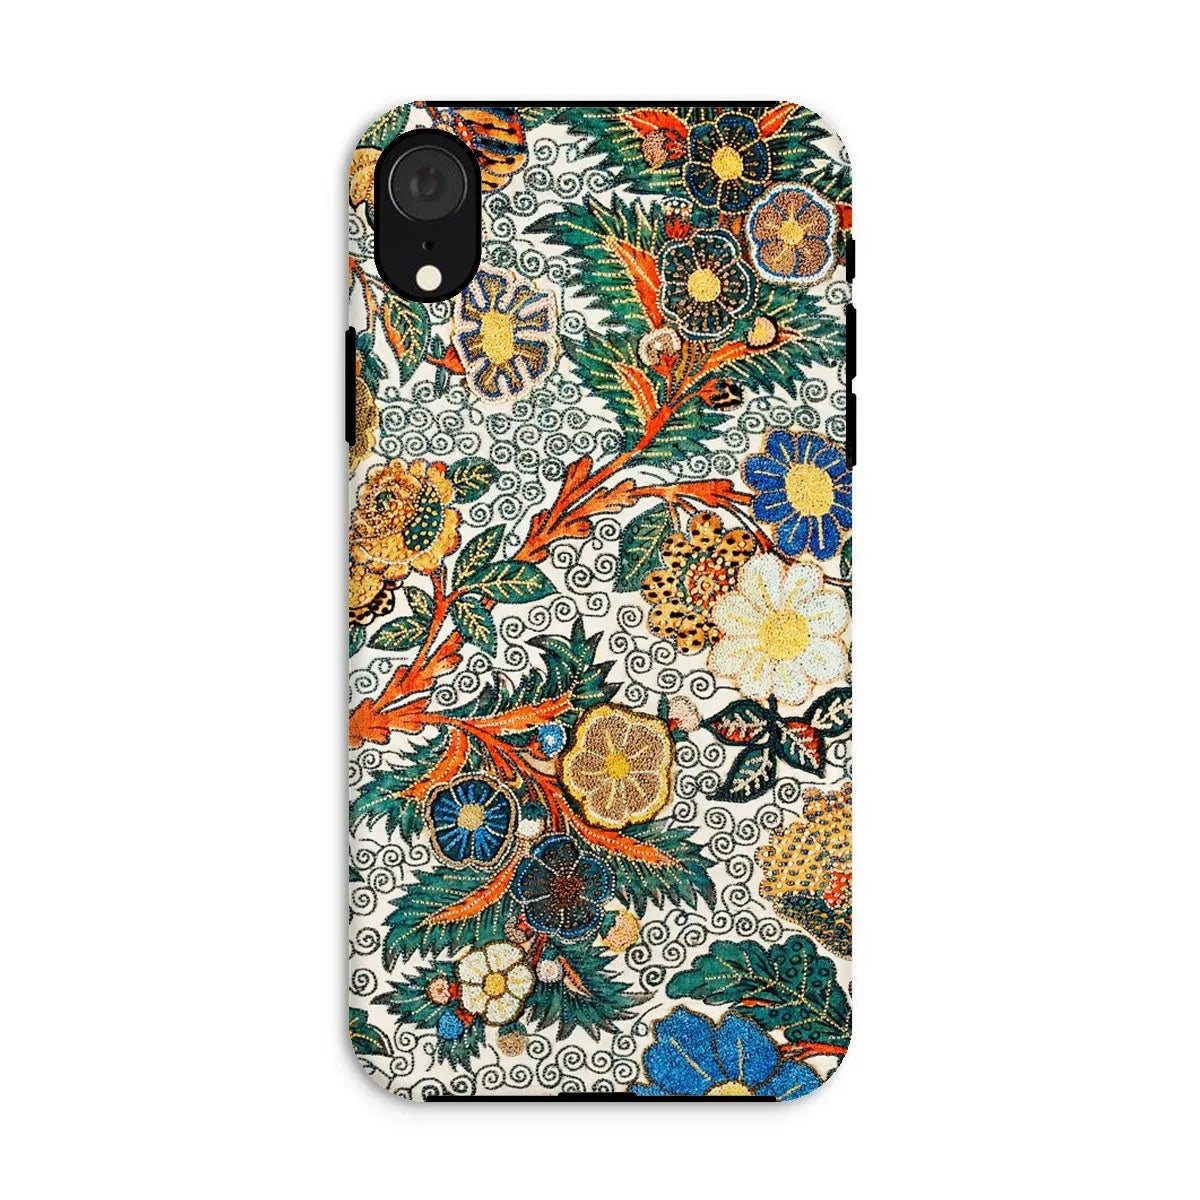 Blossomewhere Japanese Tapestry Art Phone Case - Iphone Xr / Matte - Mobile Phone Cases - Aesthetic Art